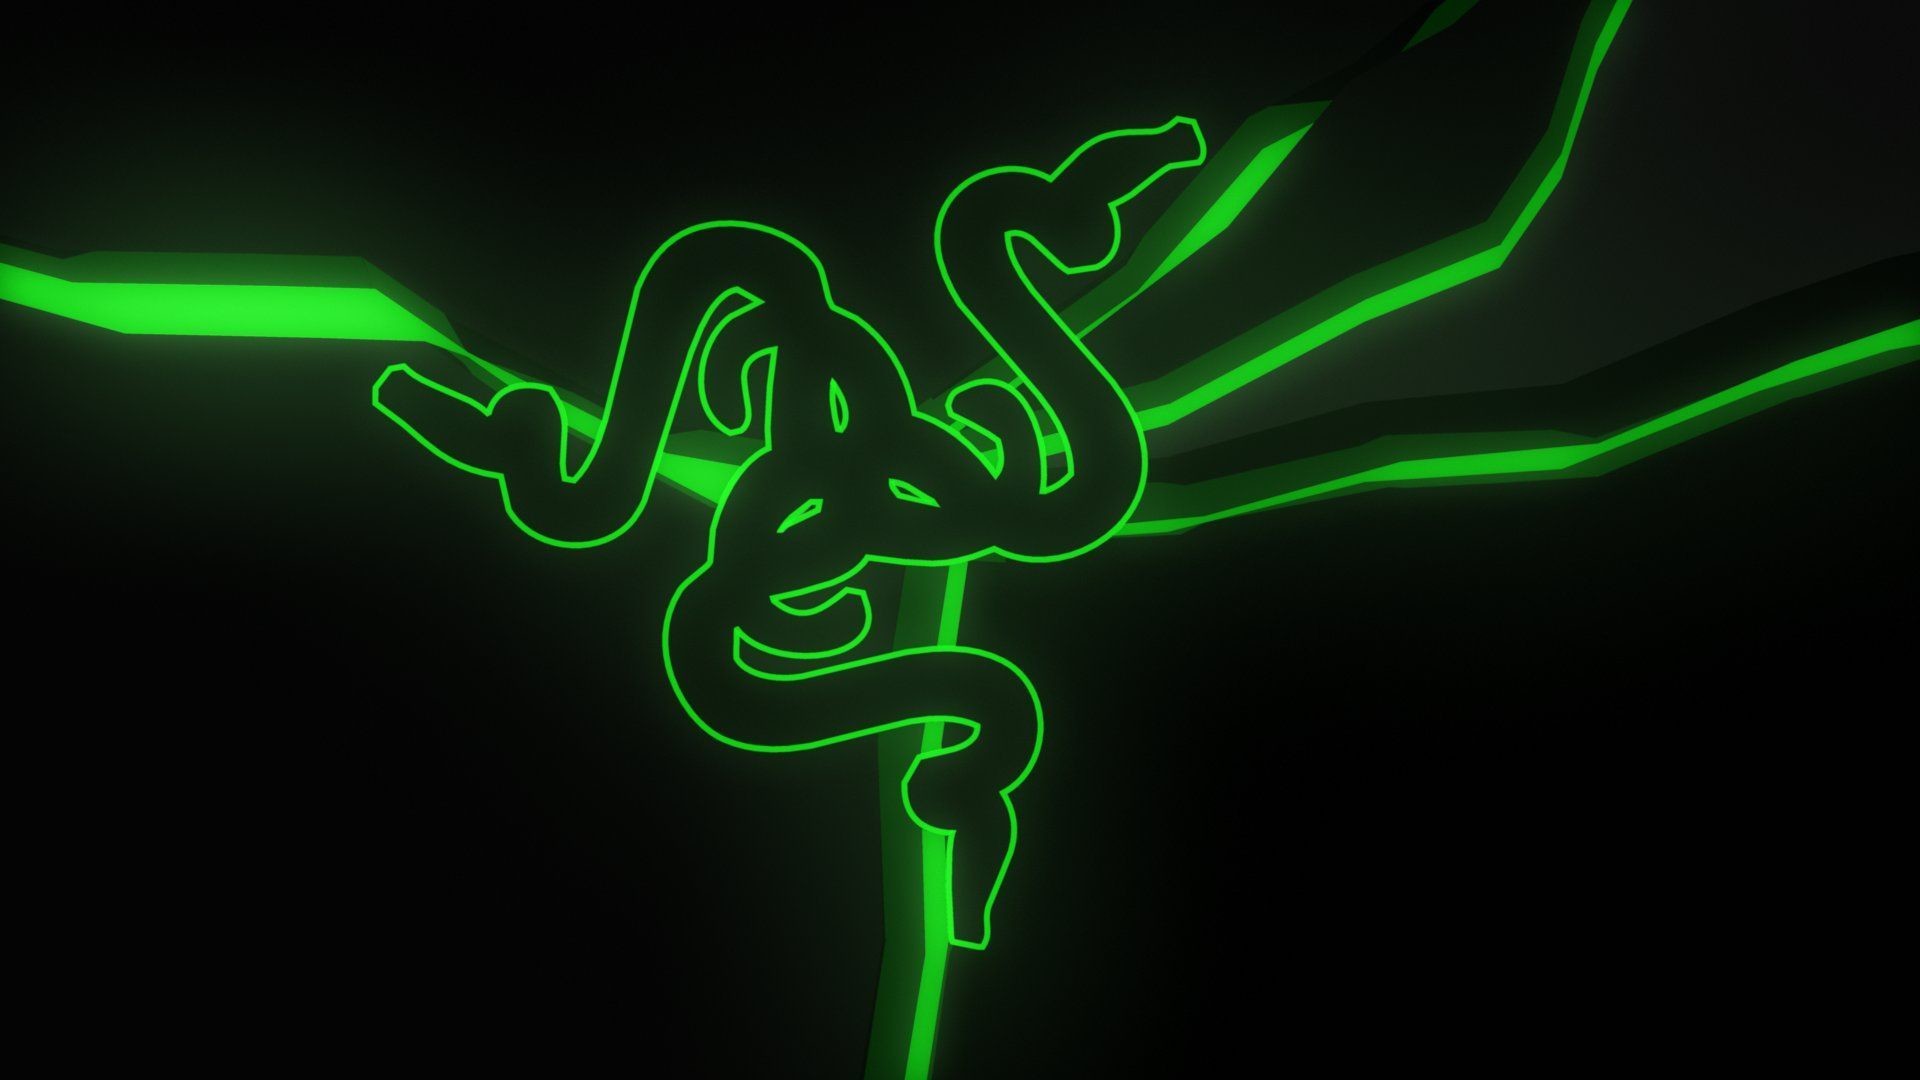 1920x1080 New Razer Gaming Wallpapers in HD